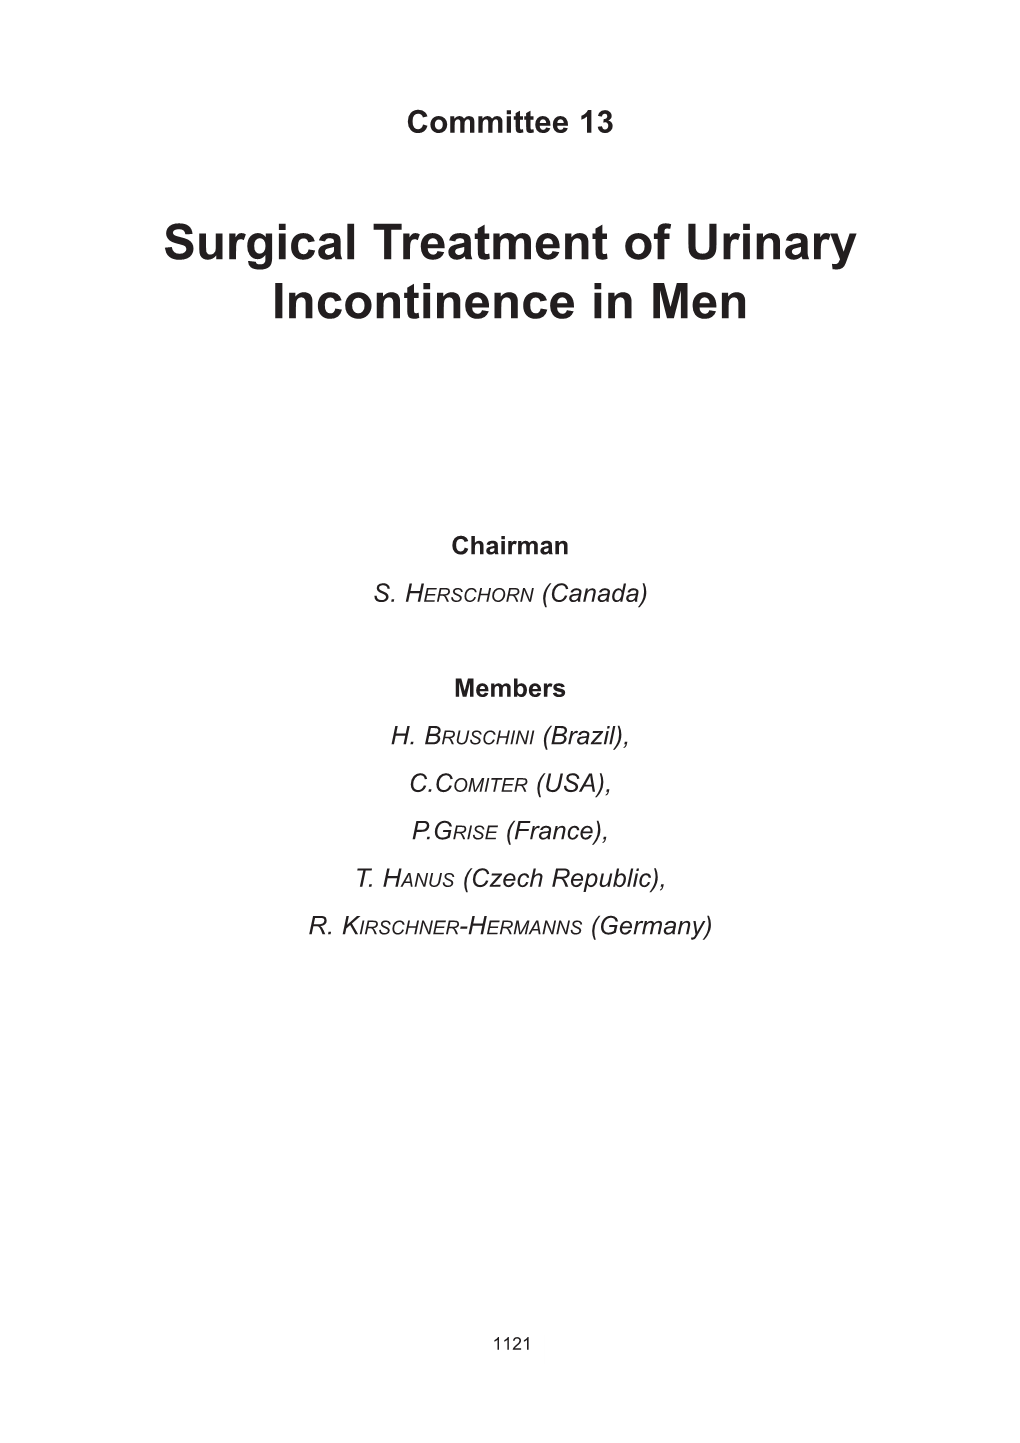 Surgical Treatment of Urinary Incontinence in Men